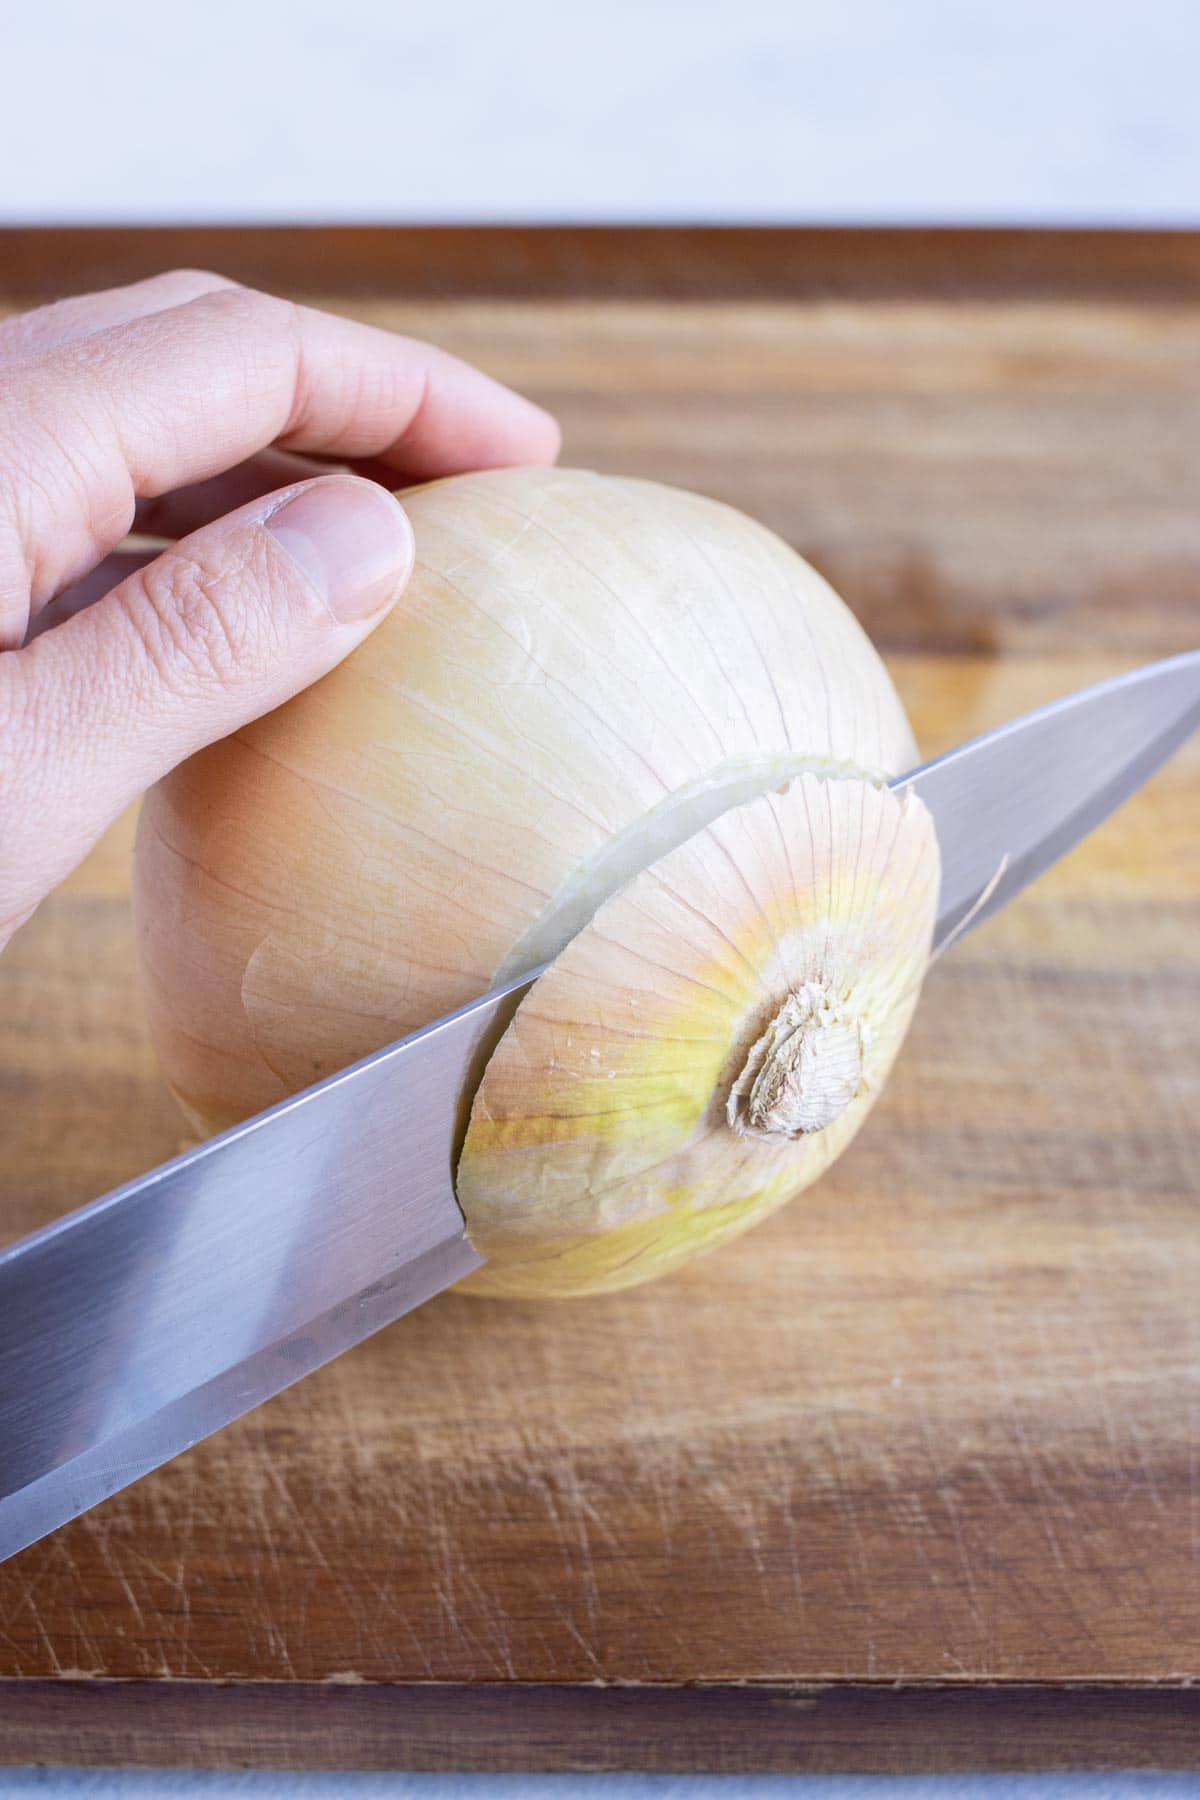 The top of the onion is cut off with a knife.